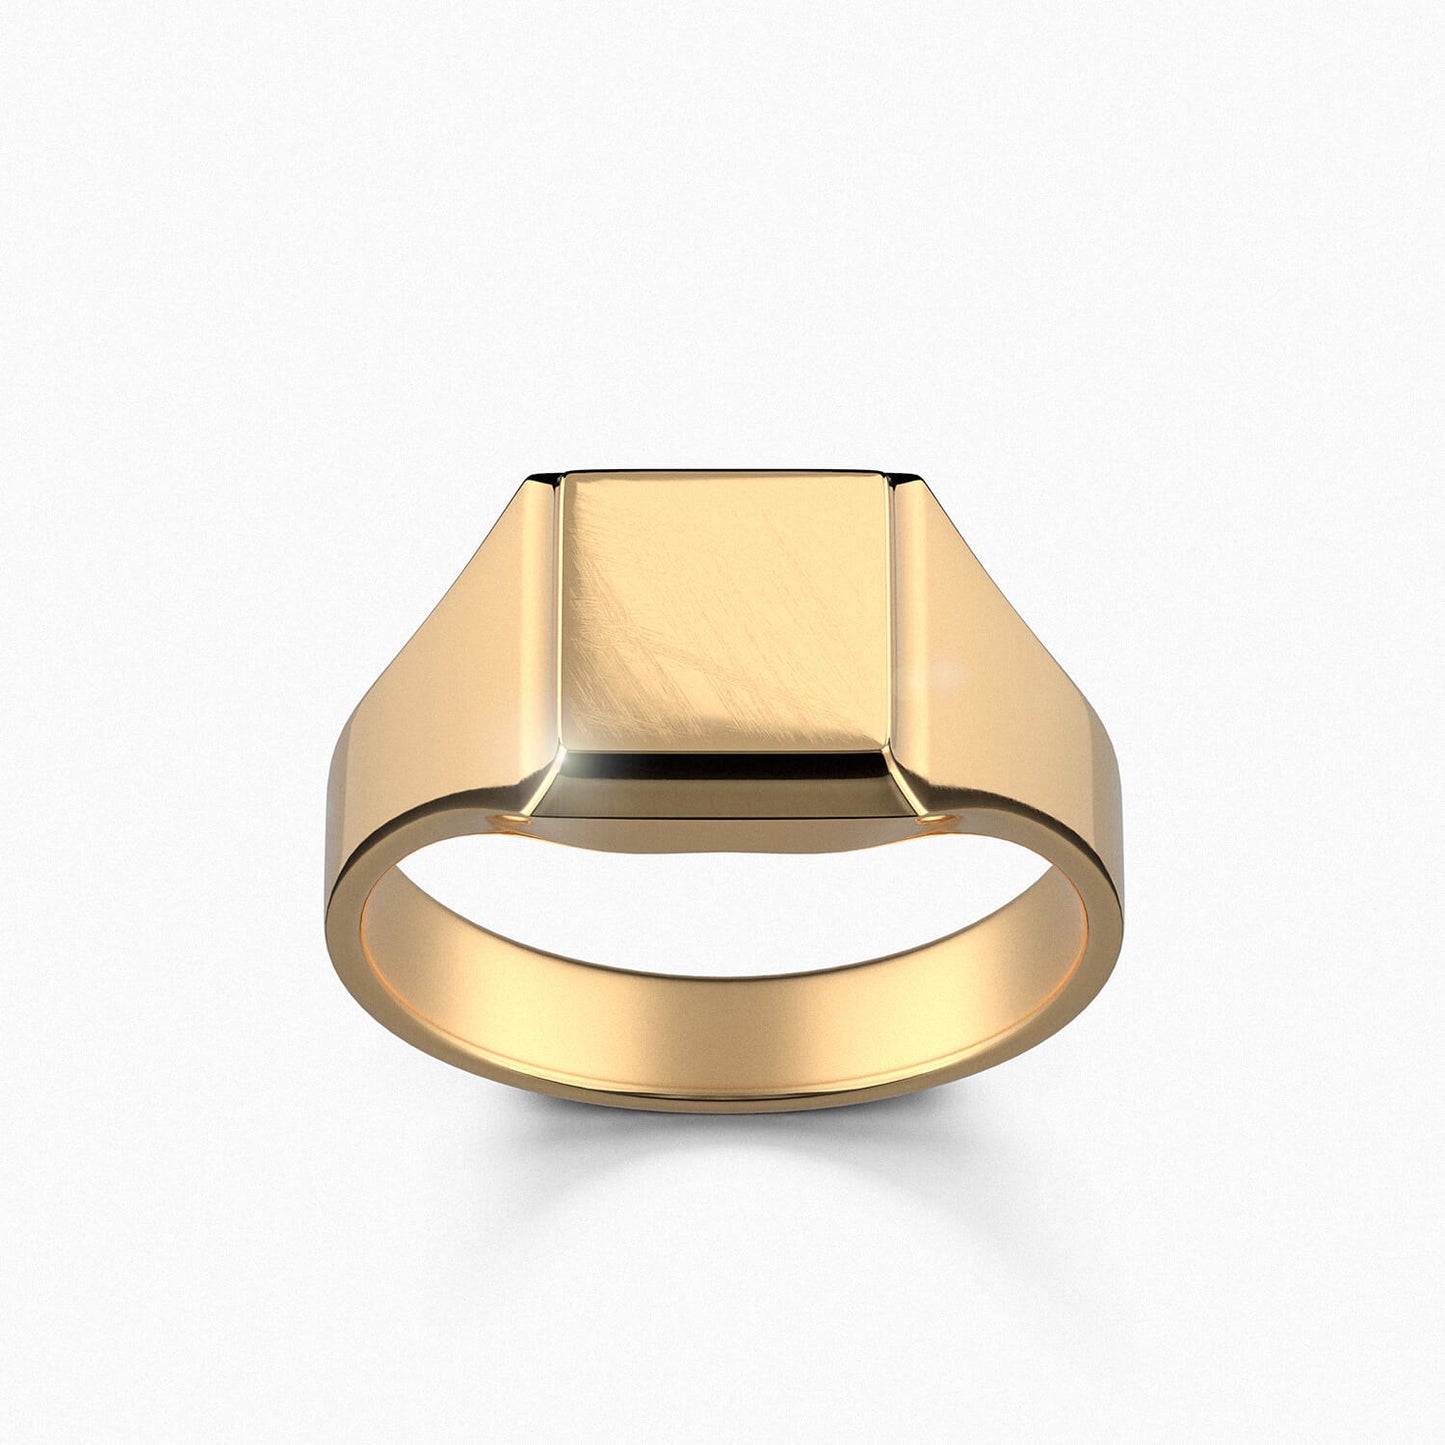 Square signet ring in sterling silver.